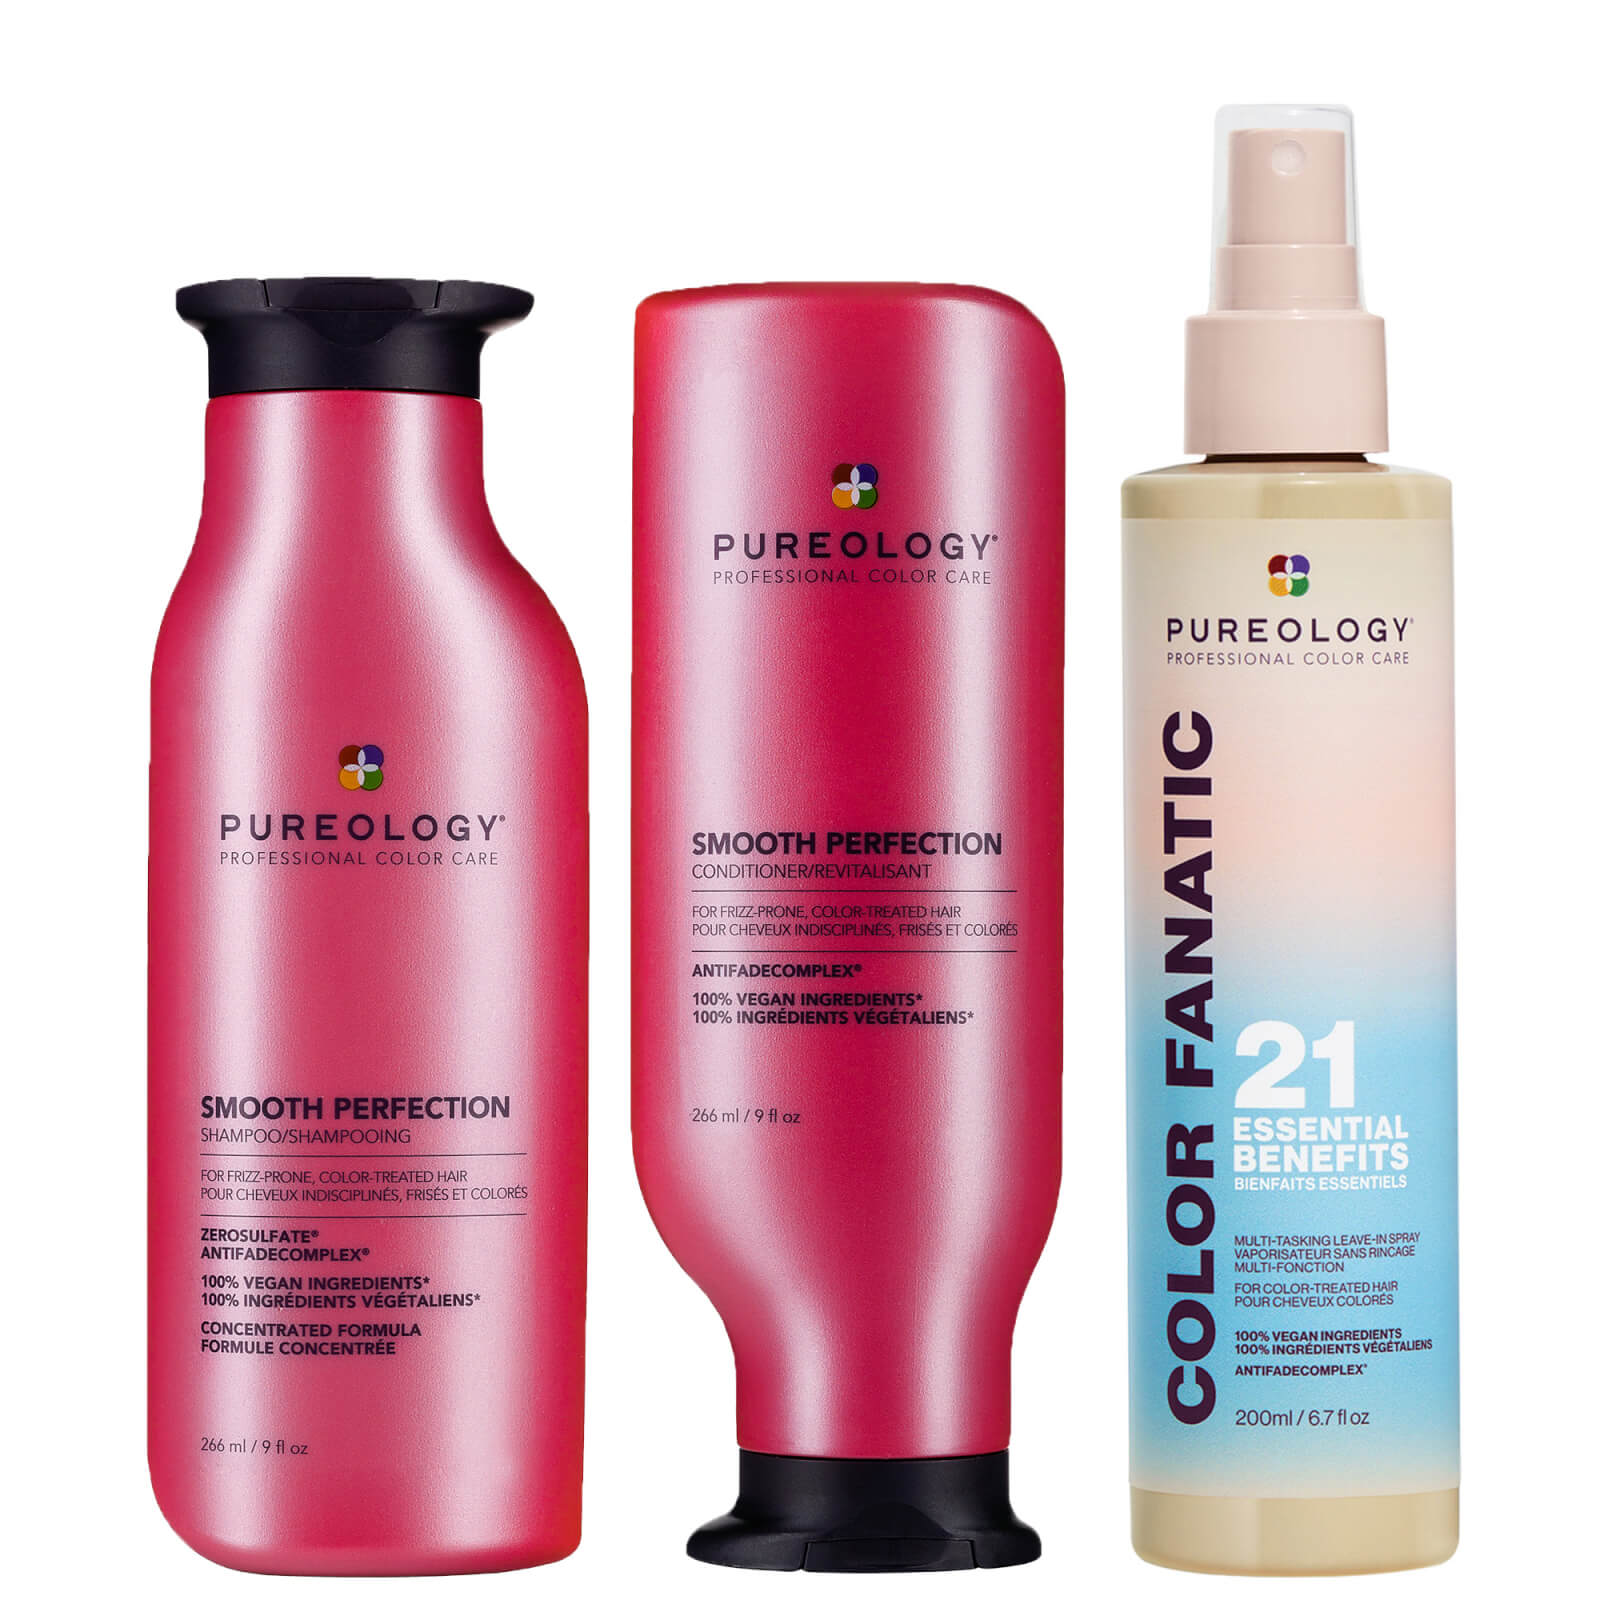 Photos - Hair Product Pureology Smooth Perfection Shampoo, Conditioner and Color Fanatic Spray f